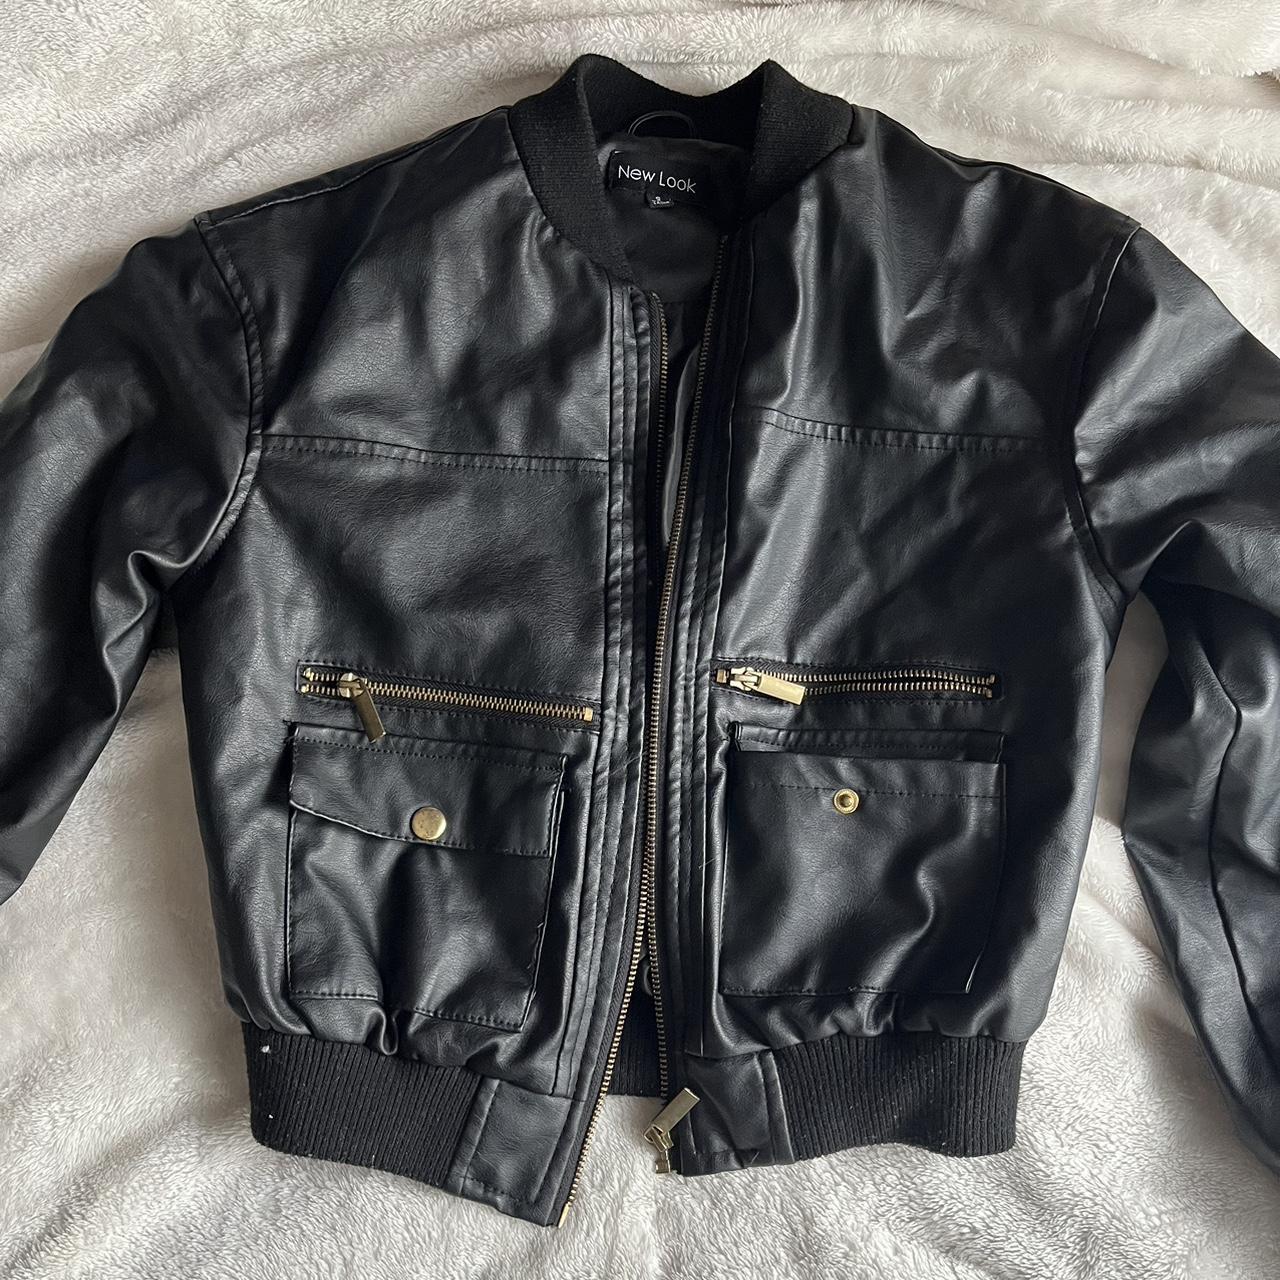 Cropped Leather Jacket from New Look Open to offers... - Depop